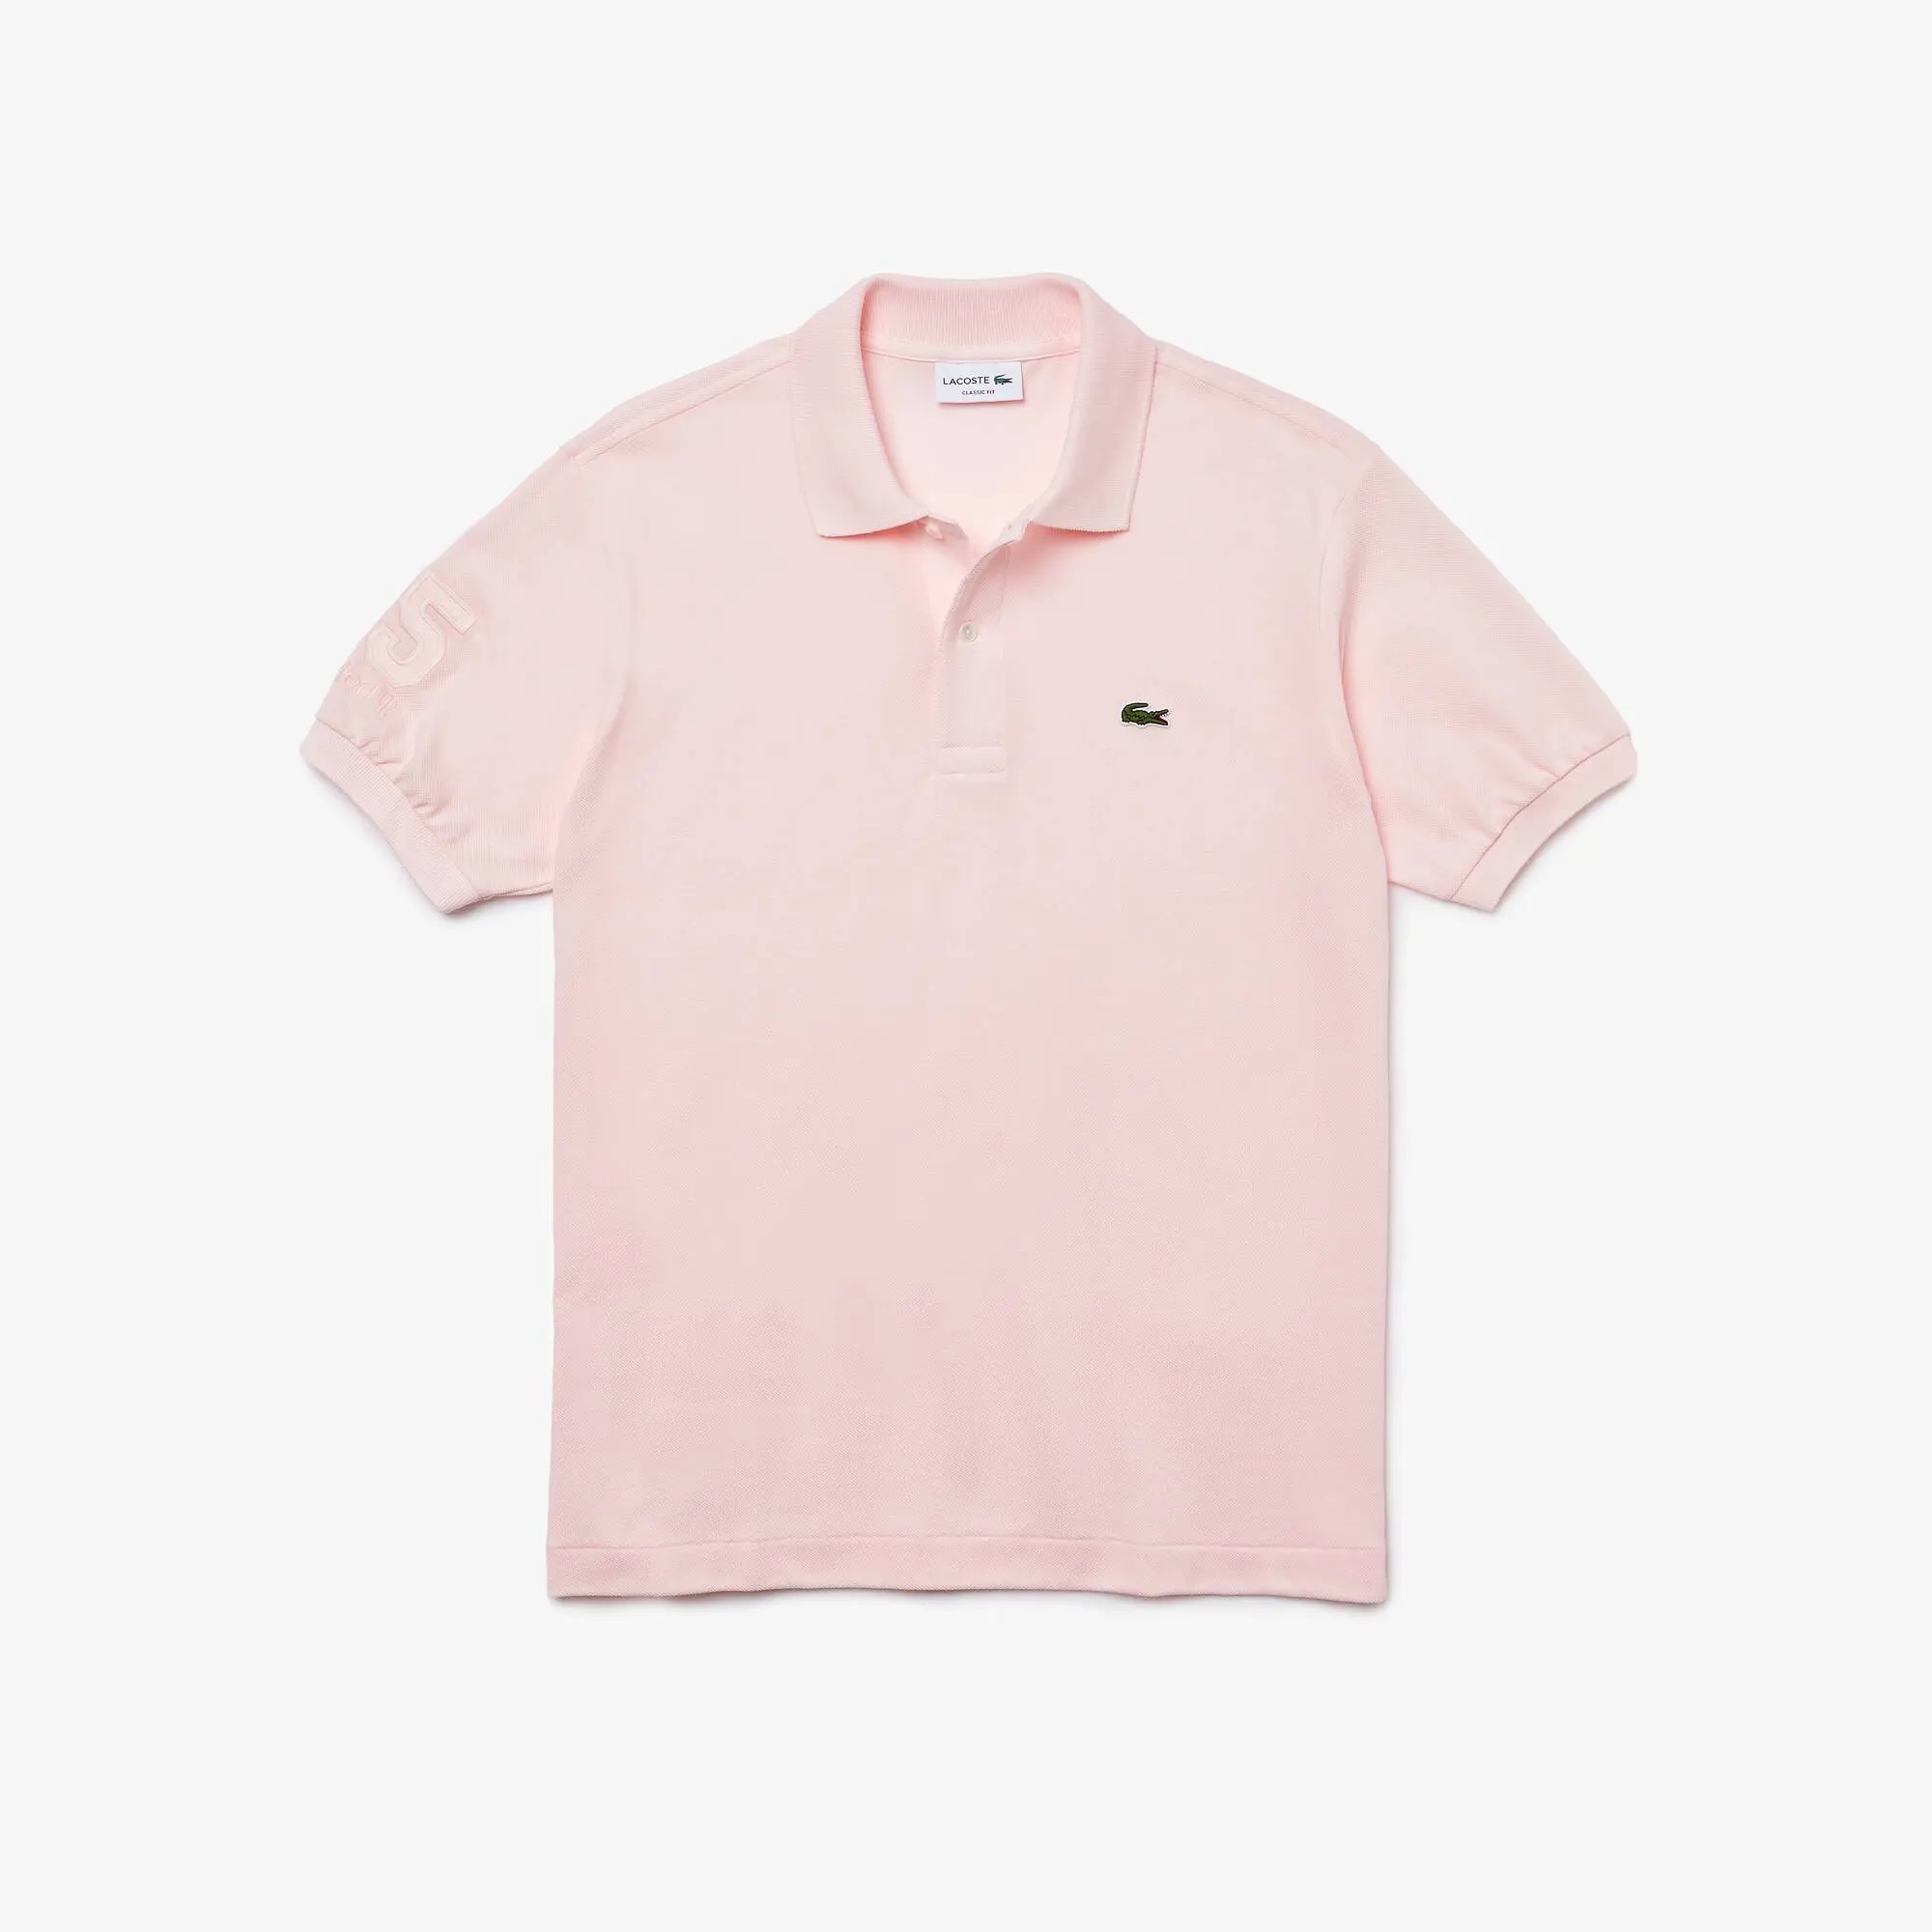 Lacoste Polo Lacoste L.12.12 - Club Med. 2